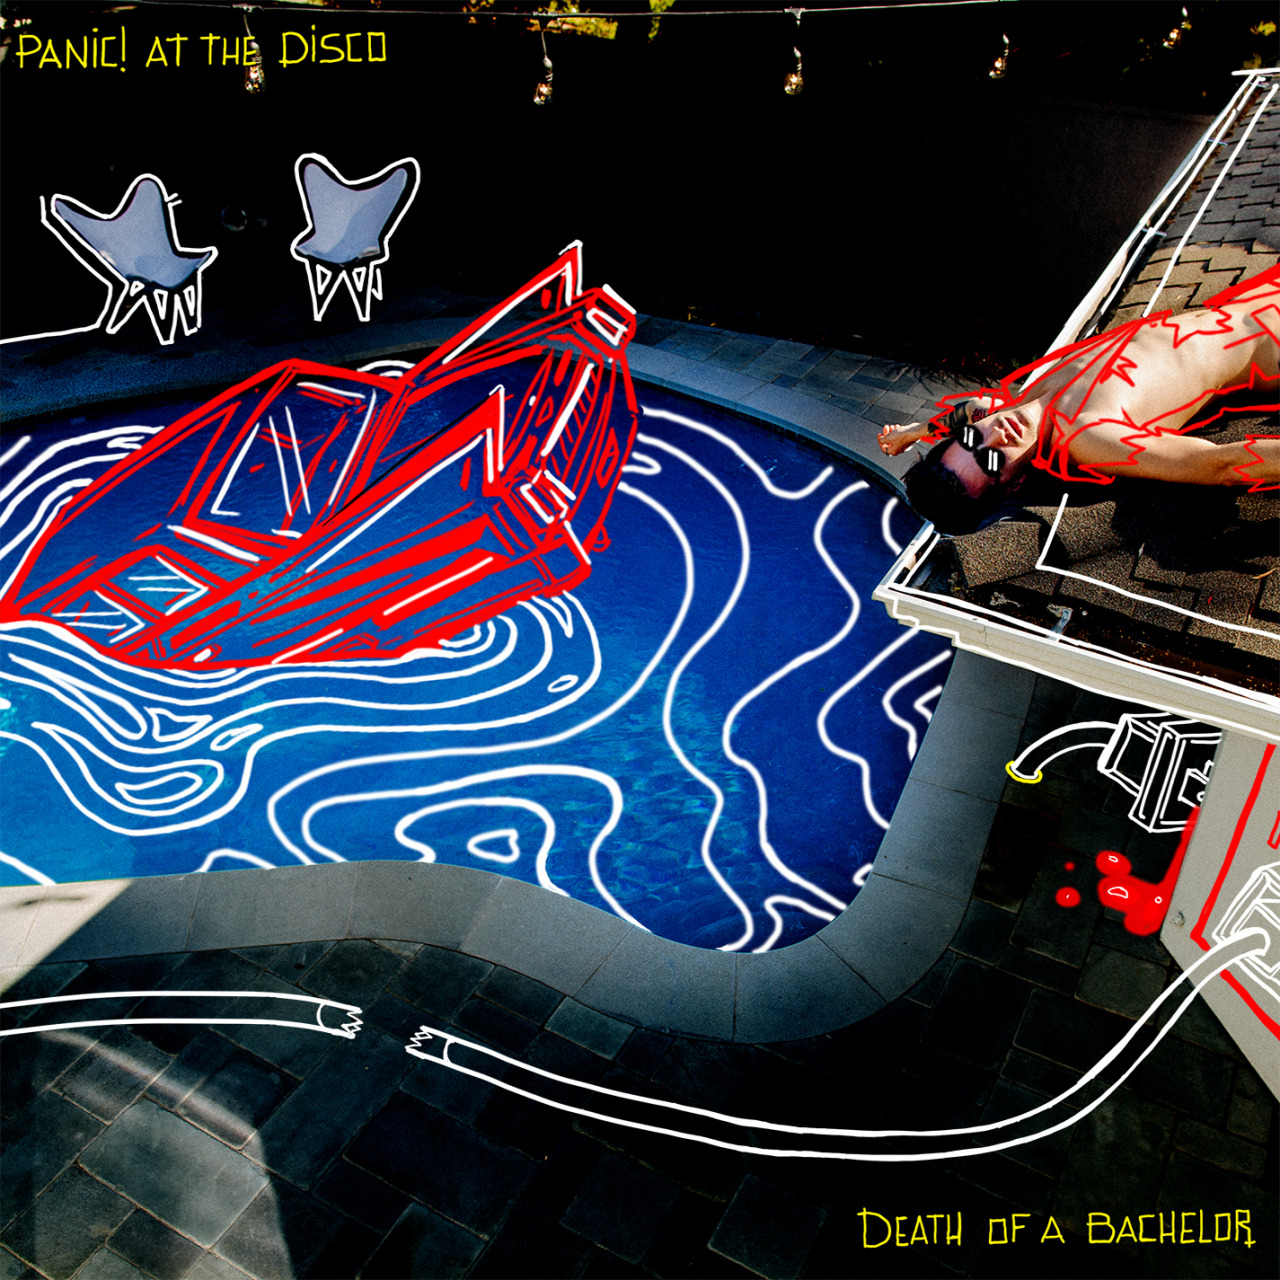 Sharing &quot;Death of a Bachelor&quot; Album by Panic! at the Disco